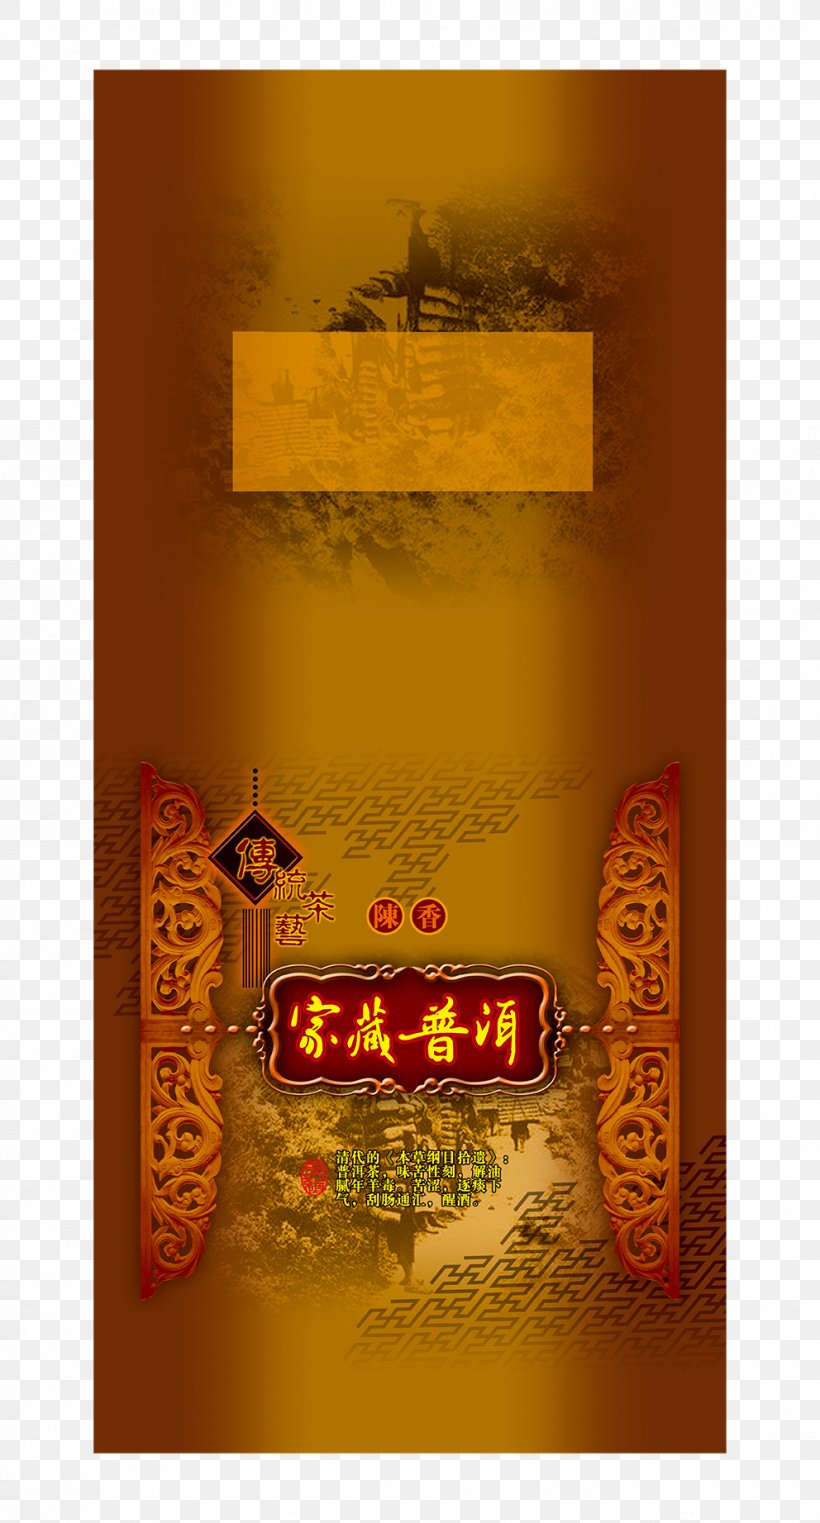 White Tea Puer City Lapsang Souchong Tieguanyin, PNG, 992x1843px, Tea, Advertising, Art, Box, Fermented Tea Download Free